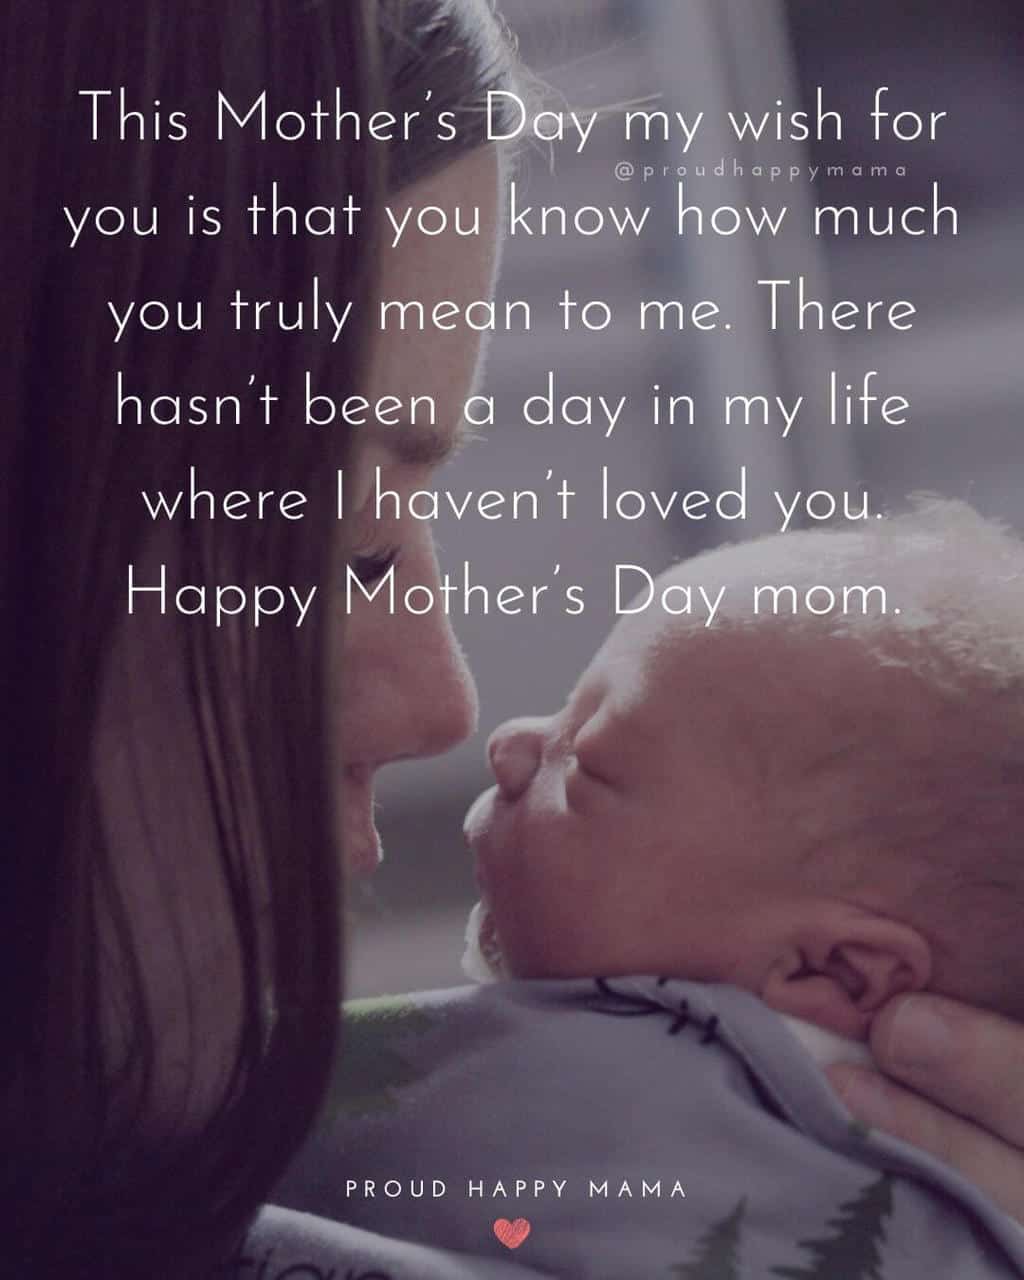 Mother Son Love Quotes | This Mother’s Day my wish for you is that you know how much you truly mean to me. There hasn’t been a day in my life where I haven’t loved you. Happy Mother’s Day mom.